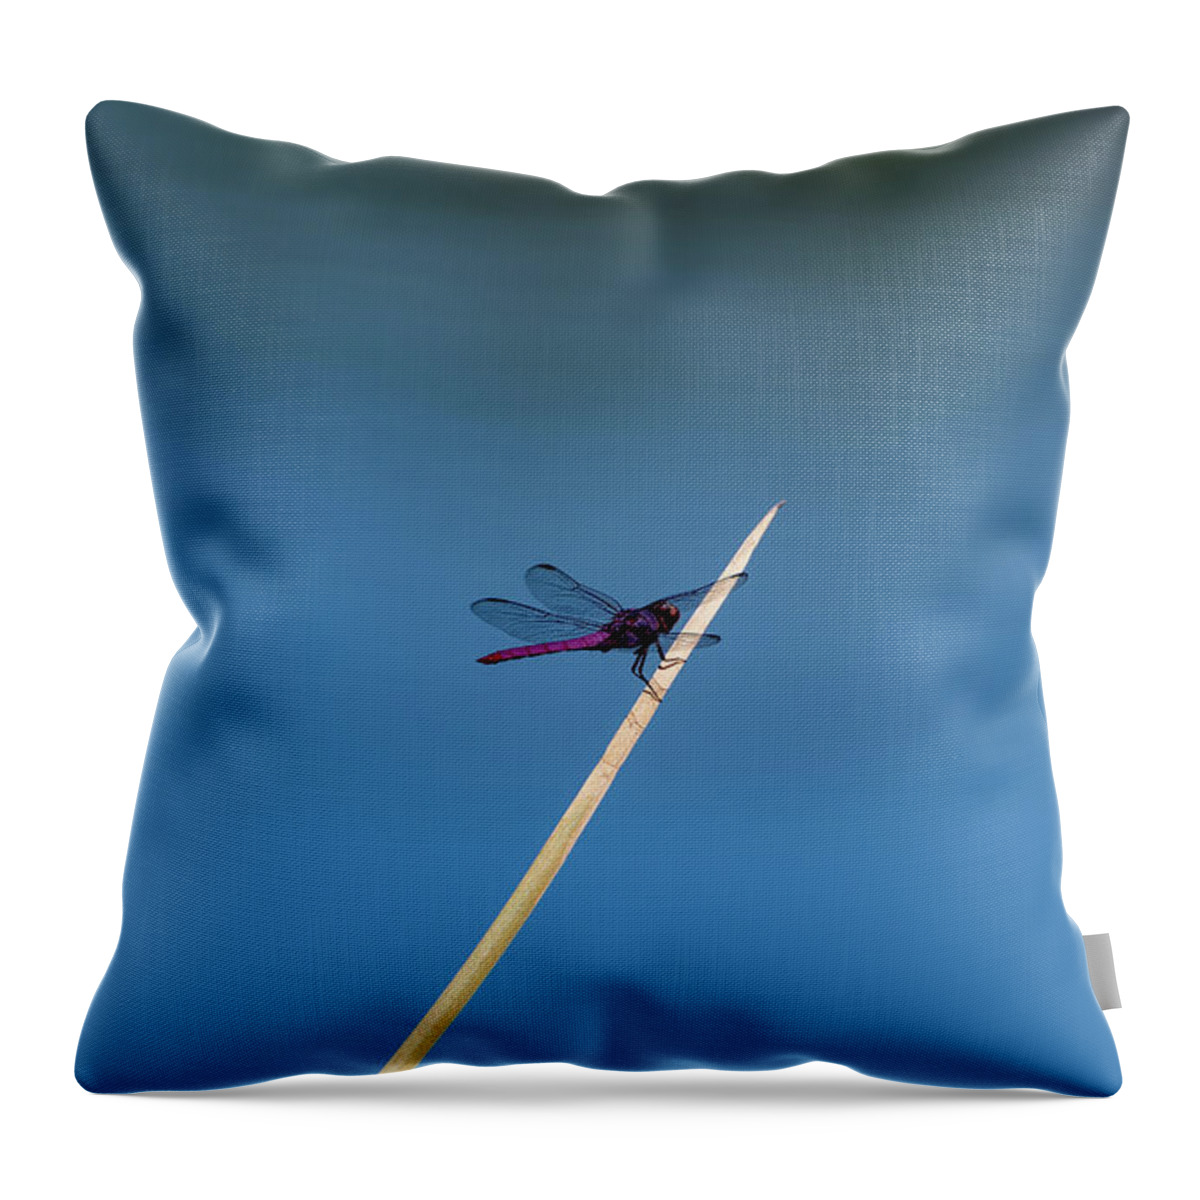 Dragonfly Throw Pillow featuring the photograph Purple Dragonfly by Douglas Killourie